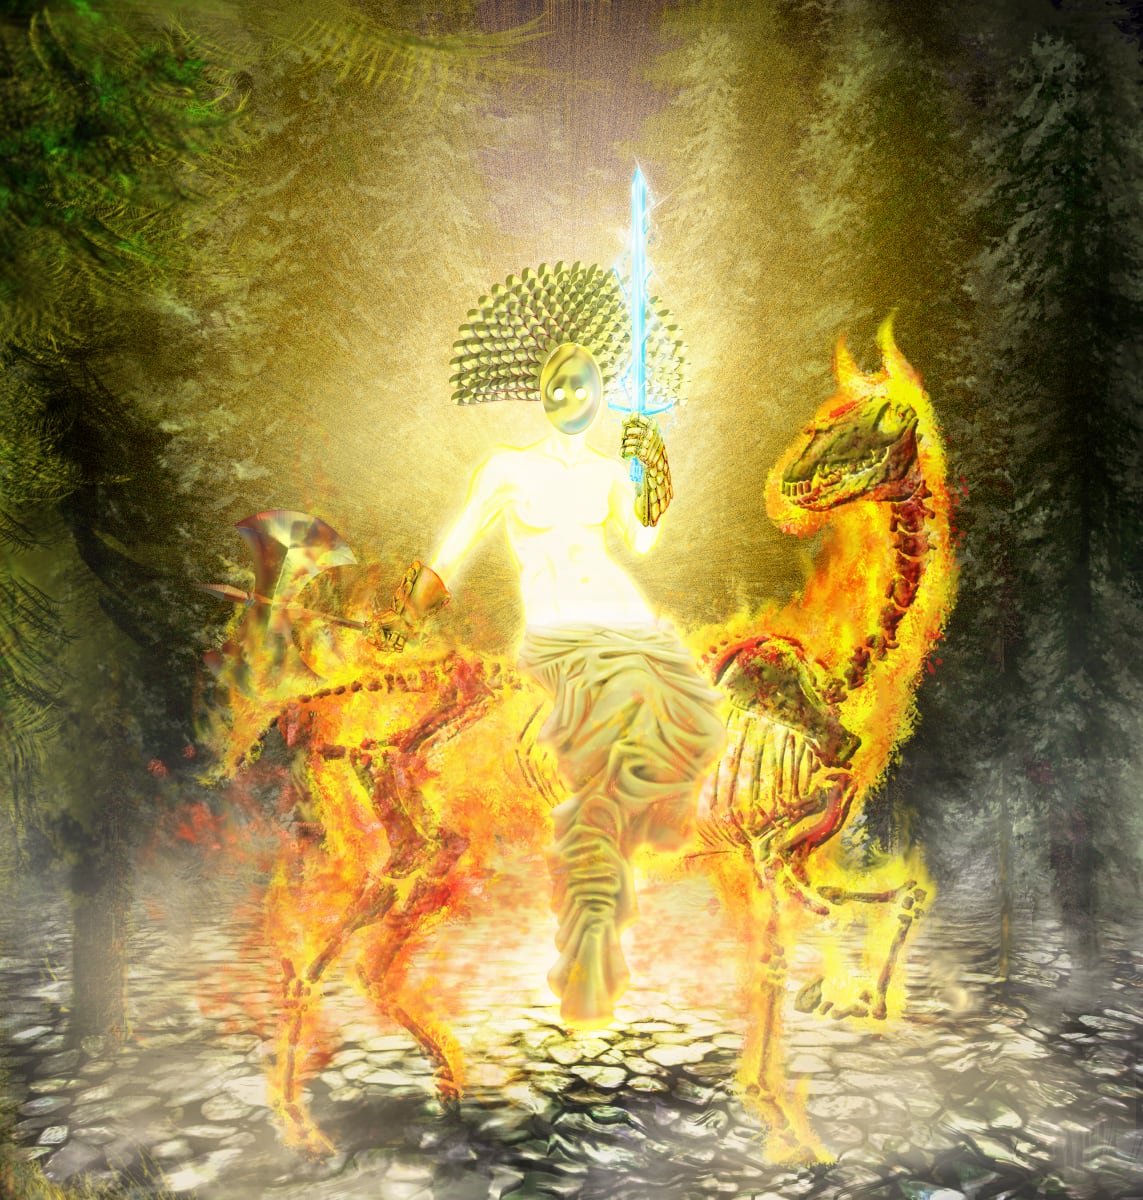 A painting of Menador from "The Malazan Book of the Fallen," by Steven Erikson. She is a brightly glowing figure on a horse made of fire and bone. They appear in a forest at night that is lit by her radiance. Her face is shrouded by a golden mask with a scaled fan-like crown. She wears golden scaled gloves and carries a sword that crackles with energy in one hand, and a double bladed axe in the other. She sits sidesaddle, facing the viewer, and has a pale cloth gathered over her legs.